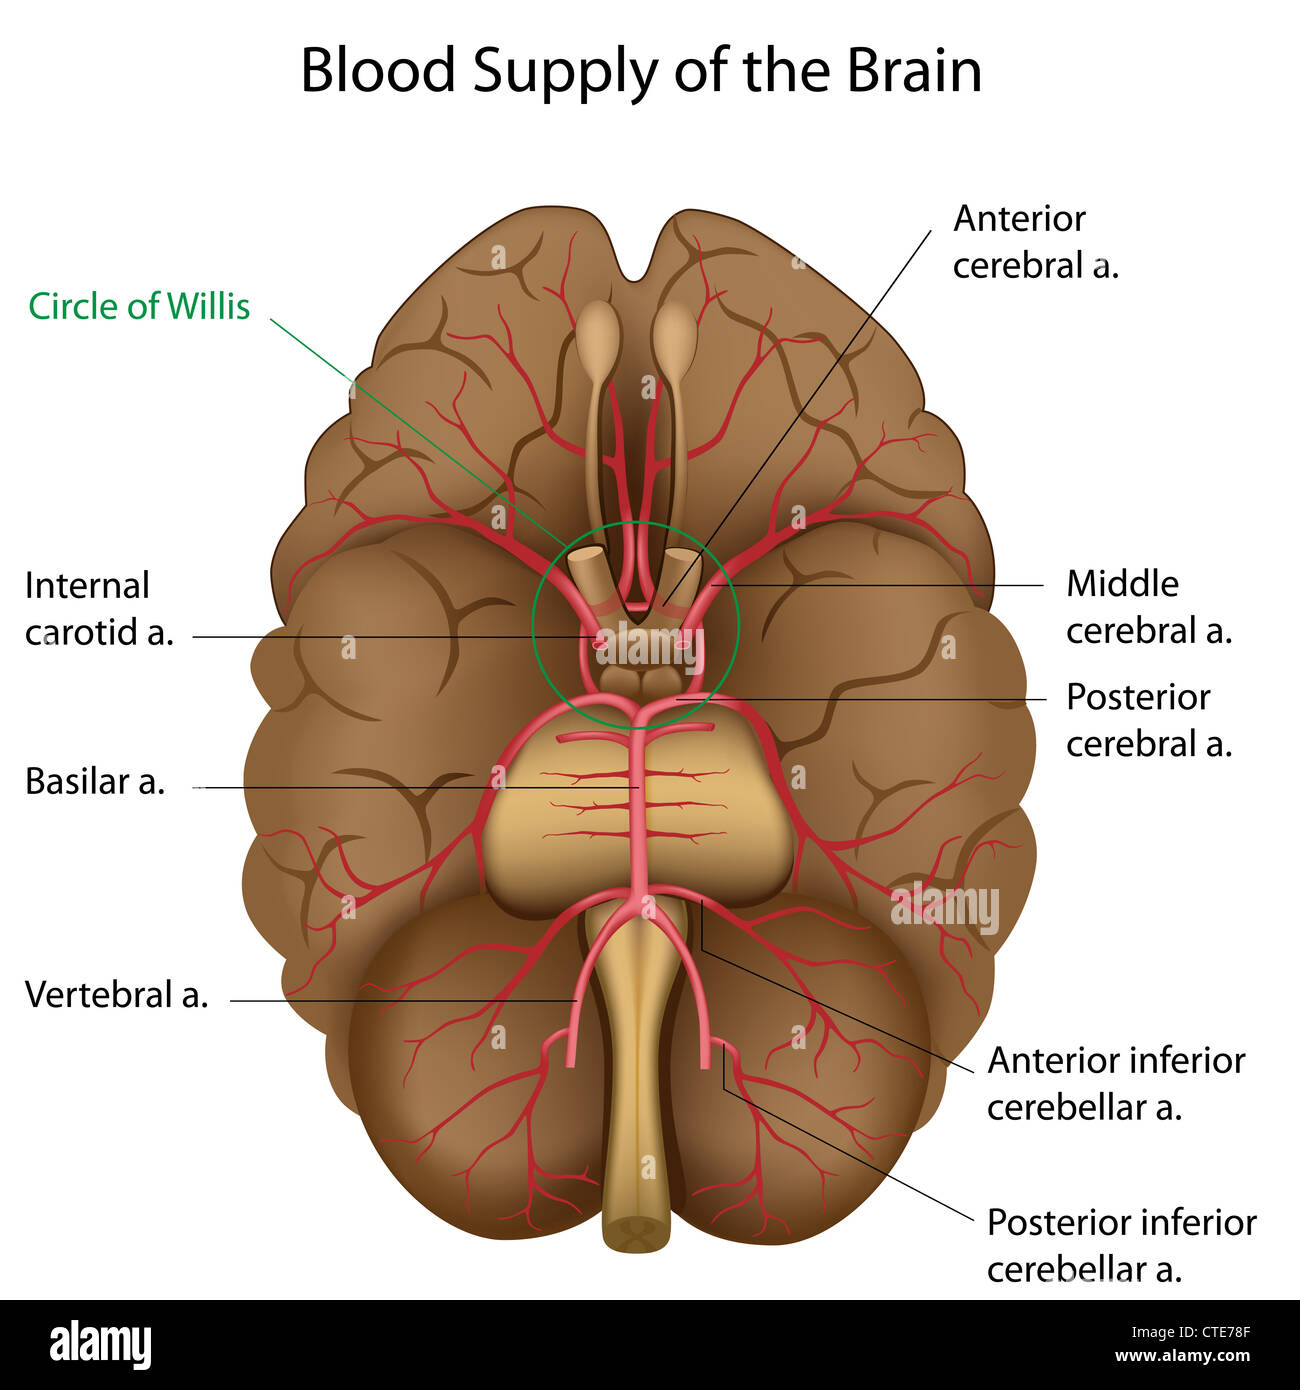 Blood supply of the brain Stock Photo